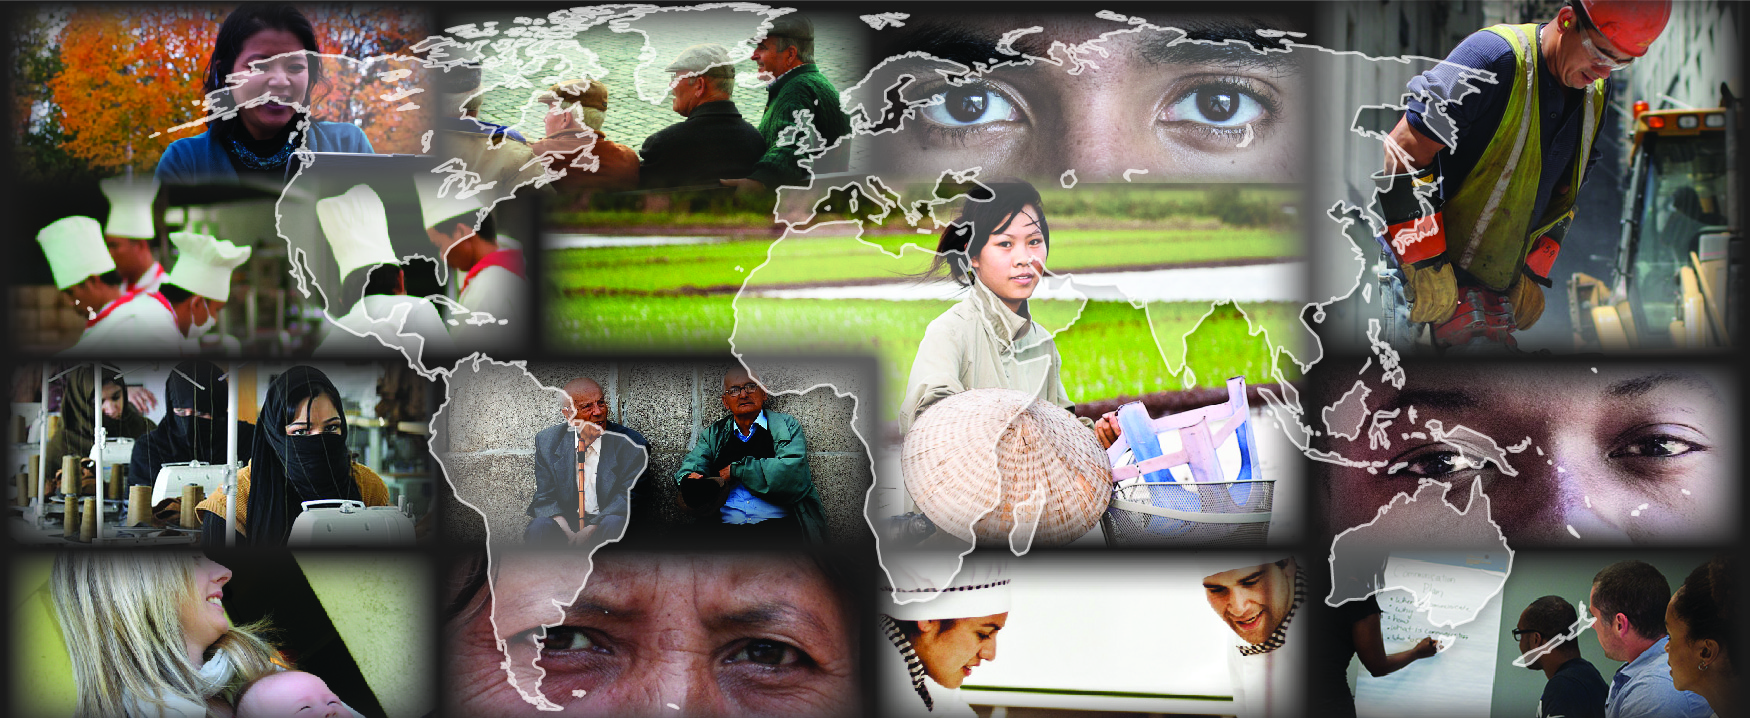 This is a collage of different photos showing a diverse range of people. There is a transparent outline of a map of the world over top of these photos. Photos around the outside, clockwise from the top left: A person is working outside on a laptop. A group of four people are sitting on a bench. This photo is a close up of a person with darker skin tone’s eyes. A person wearing a construction hat and vest is using a jackhammer. This photo is a close up of a person with medium skin tone’s eyes. People at a table are all listening to someone writing on a board during a meeting. Two people in chef outfits are working together. This photo is a close up of a person with lighter skin tone’s eyes. A woman is holding a baby. A room is filled with sewing machines in a row with people working at each machine. A group of five people in chef outfits are working together. The center right photo shows a person with a bicycle. The center left photo shows two people sitting against a concrete wall.